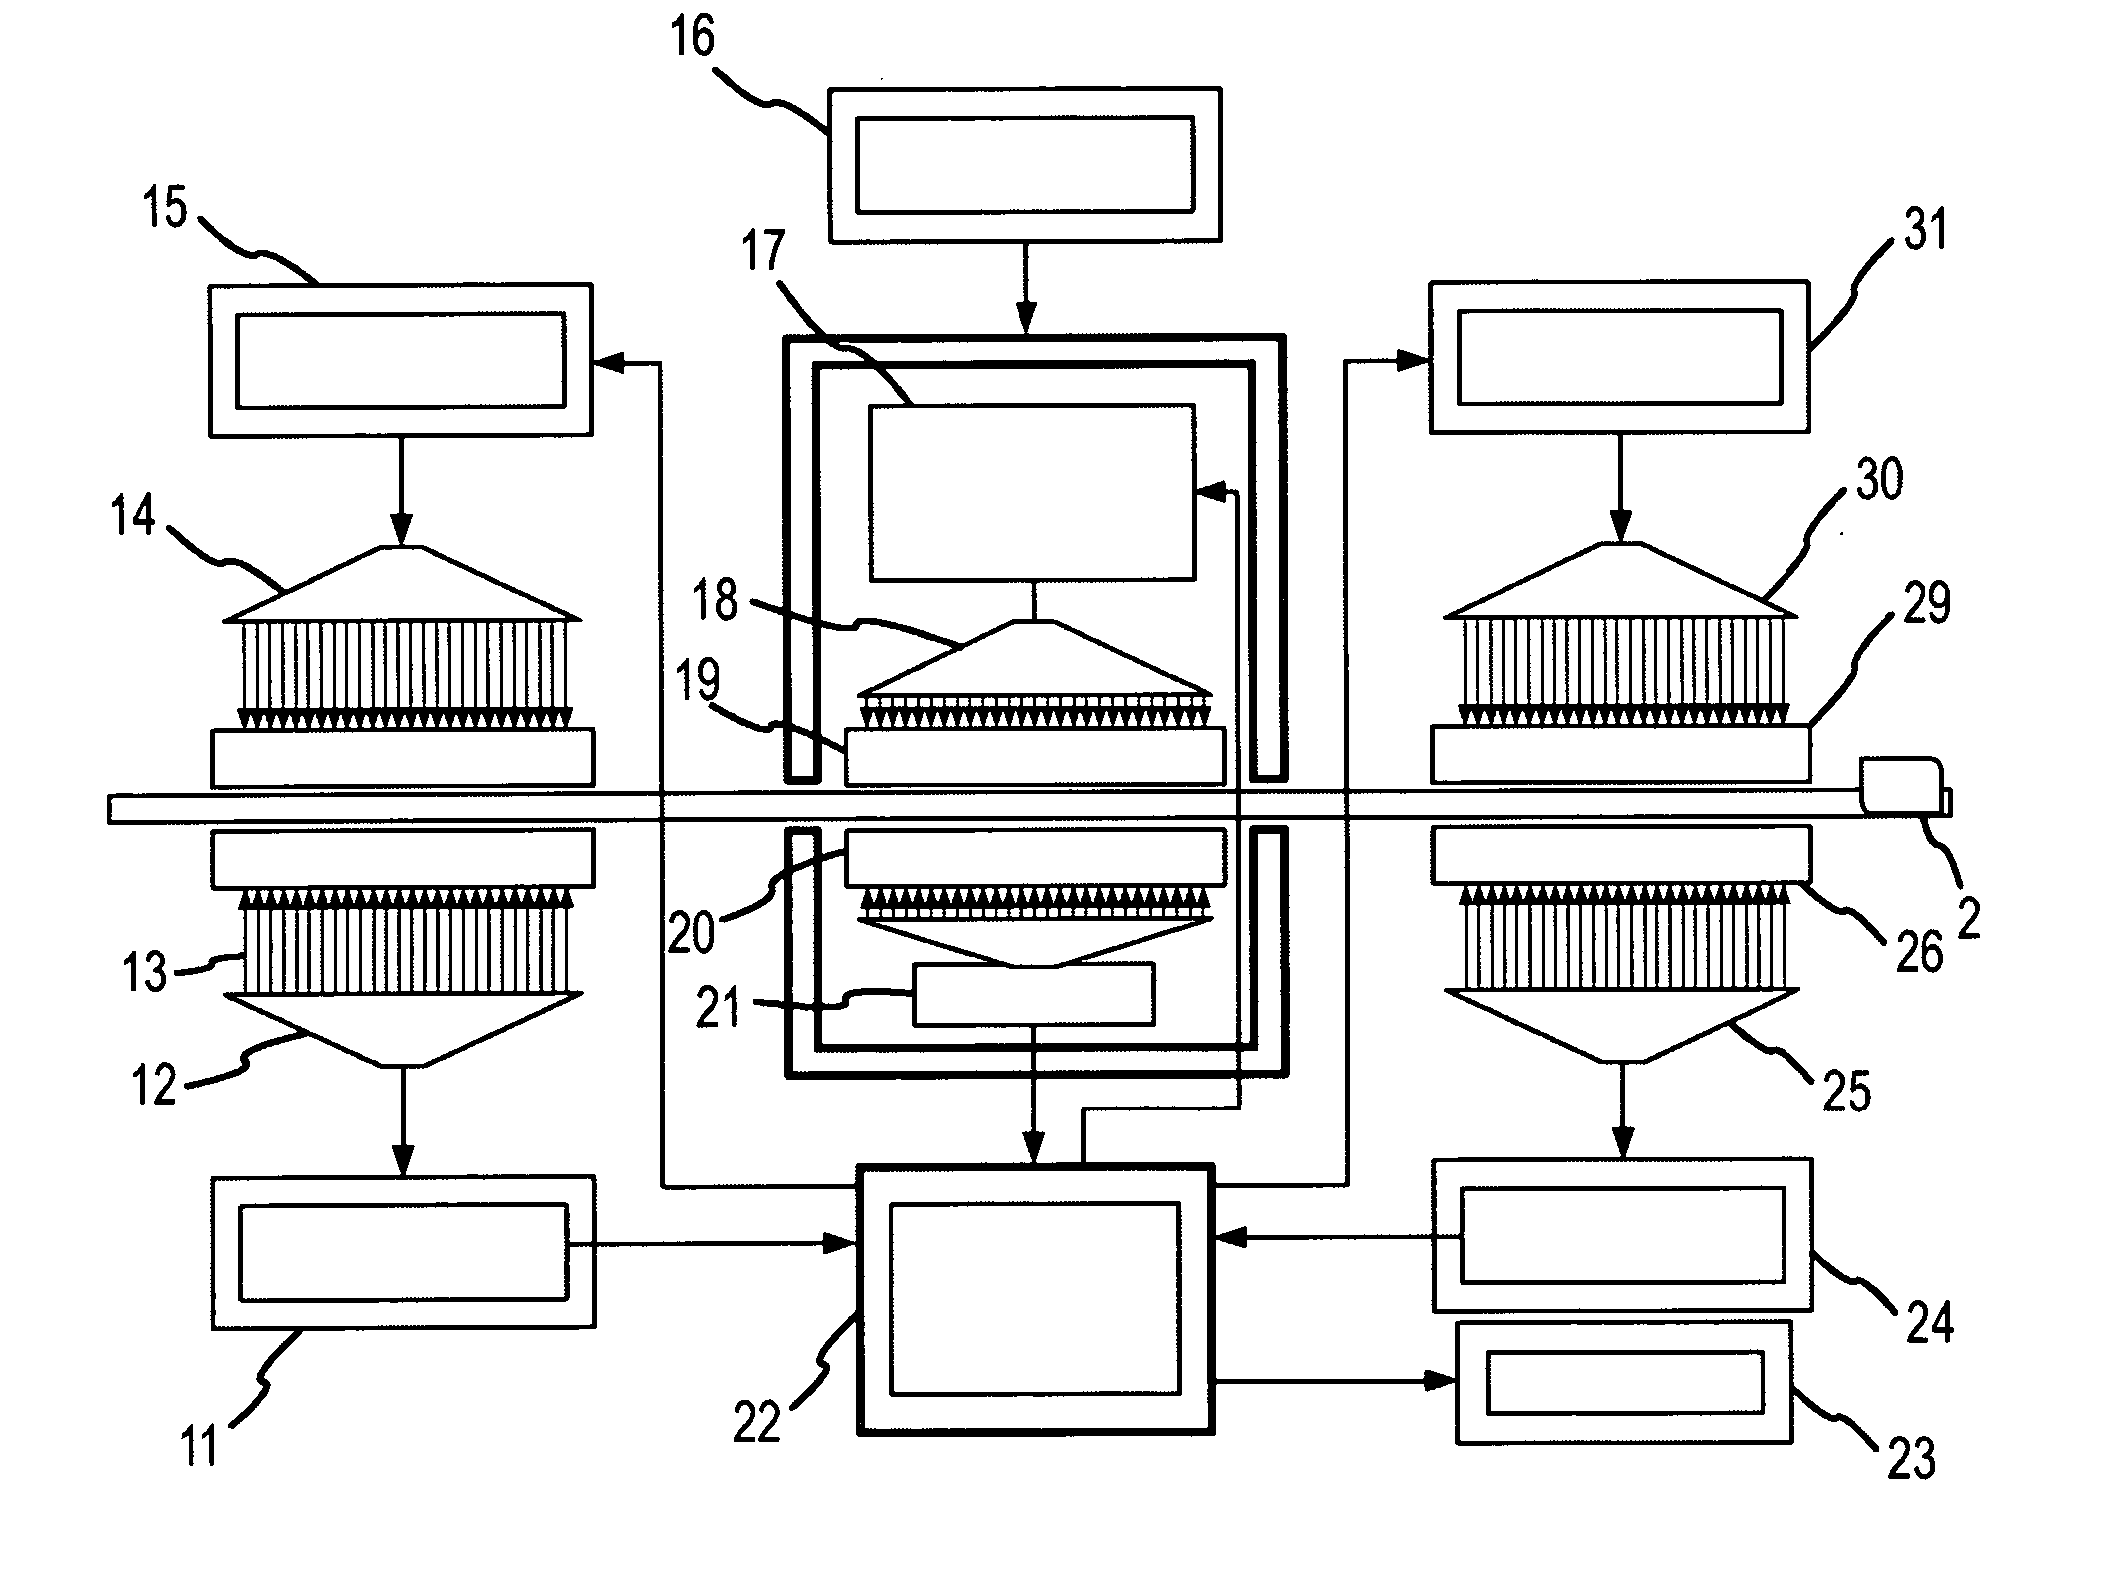 Dielectric profile controlled microwave sterilization system